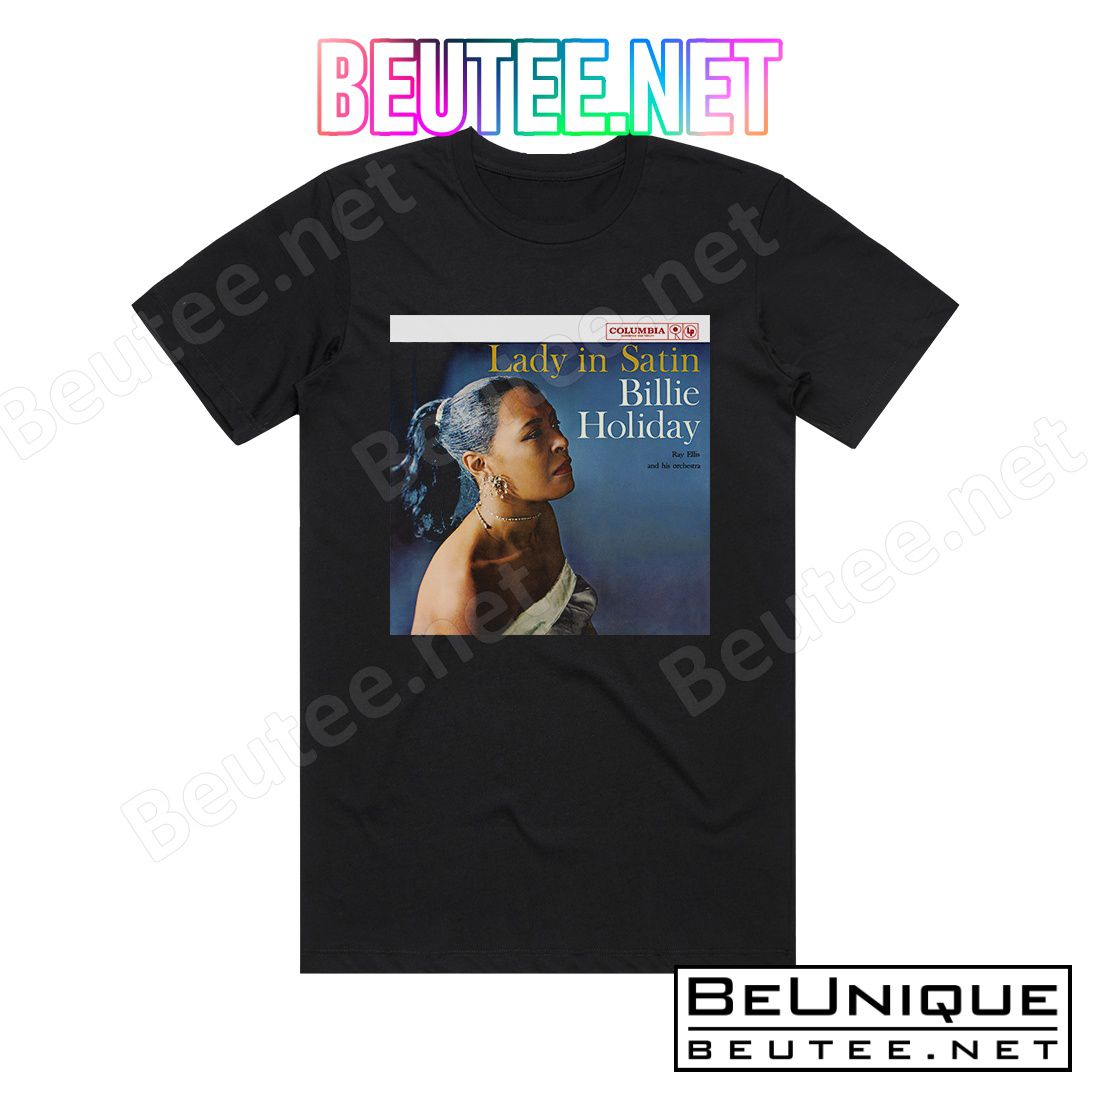 Billie Holiday Lady In Satin 2 Album Cover T-Shirt